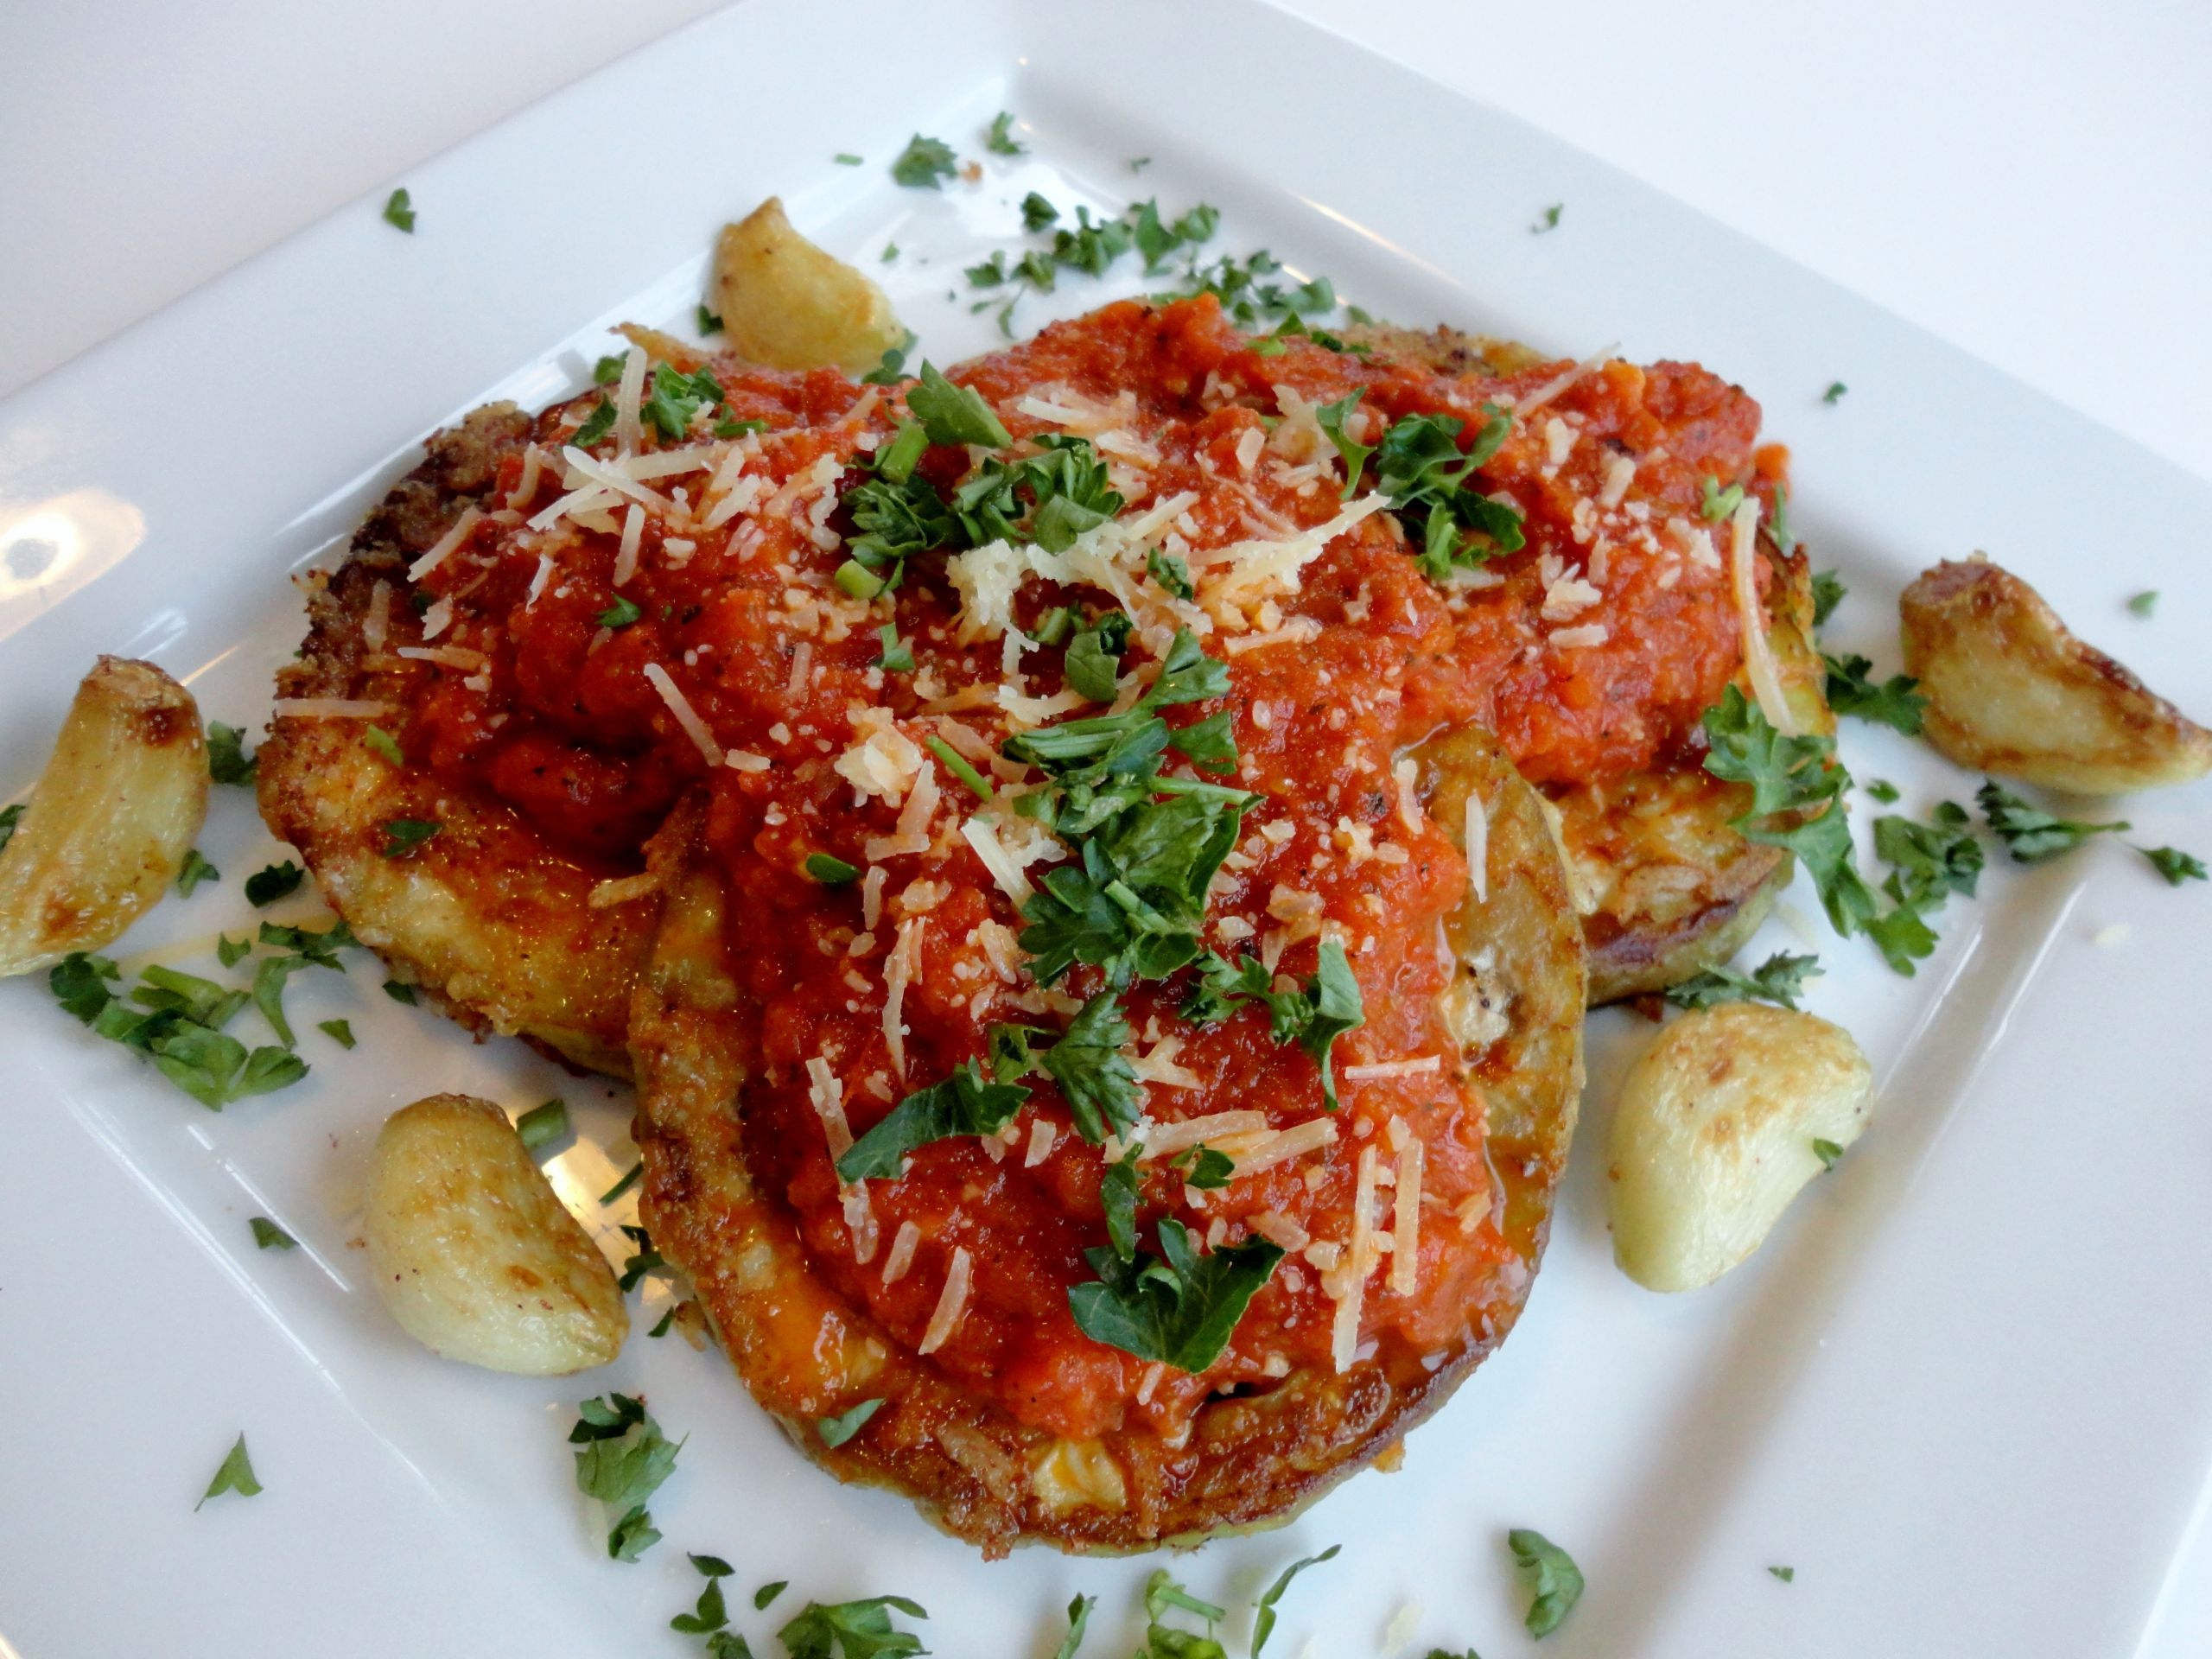 Fried Eggplant Parmesan
 Low Carb Eggplant Parmesan with Fire Roasted Tomato Sauce